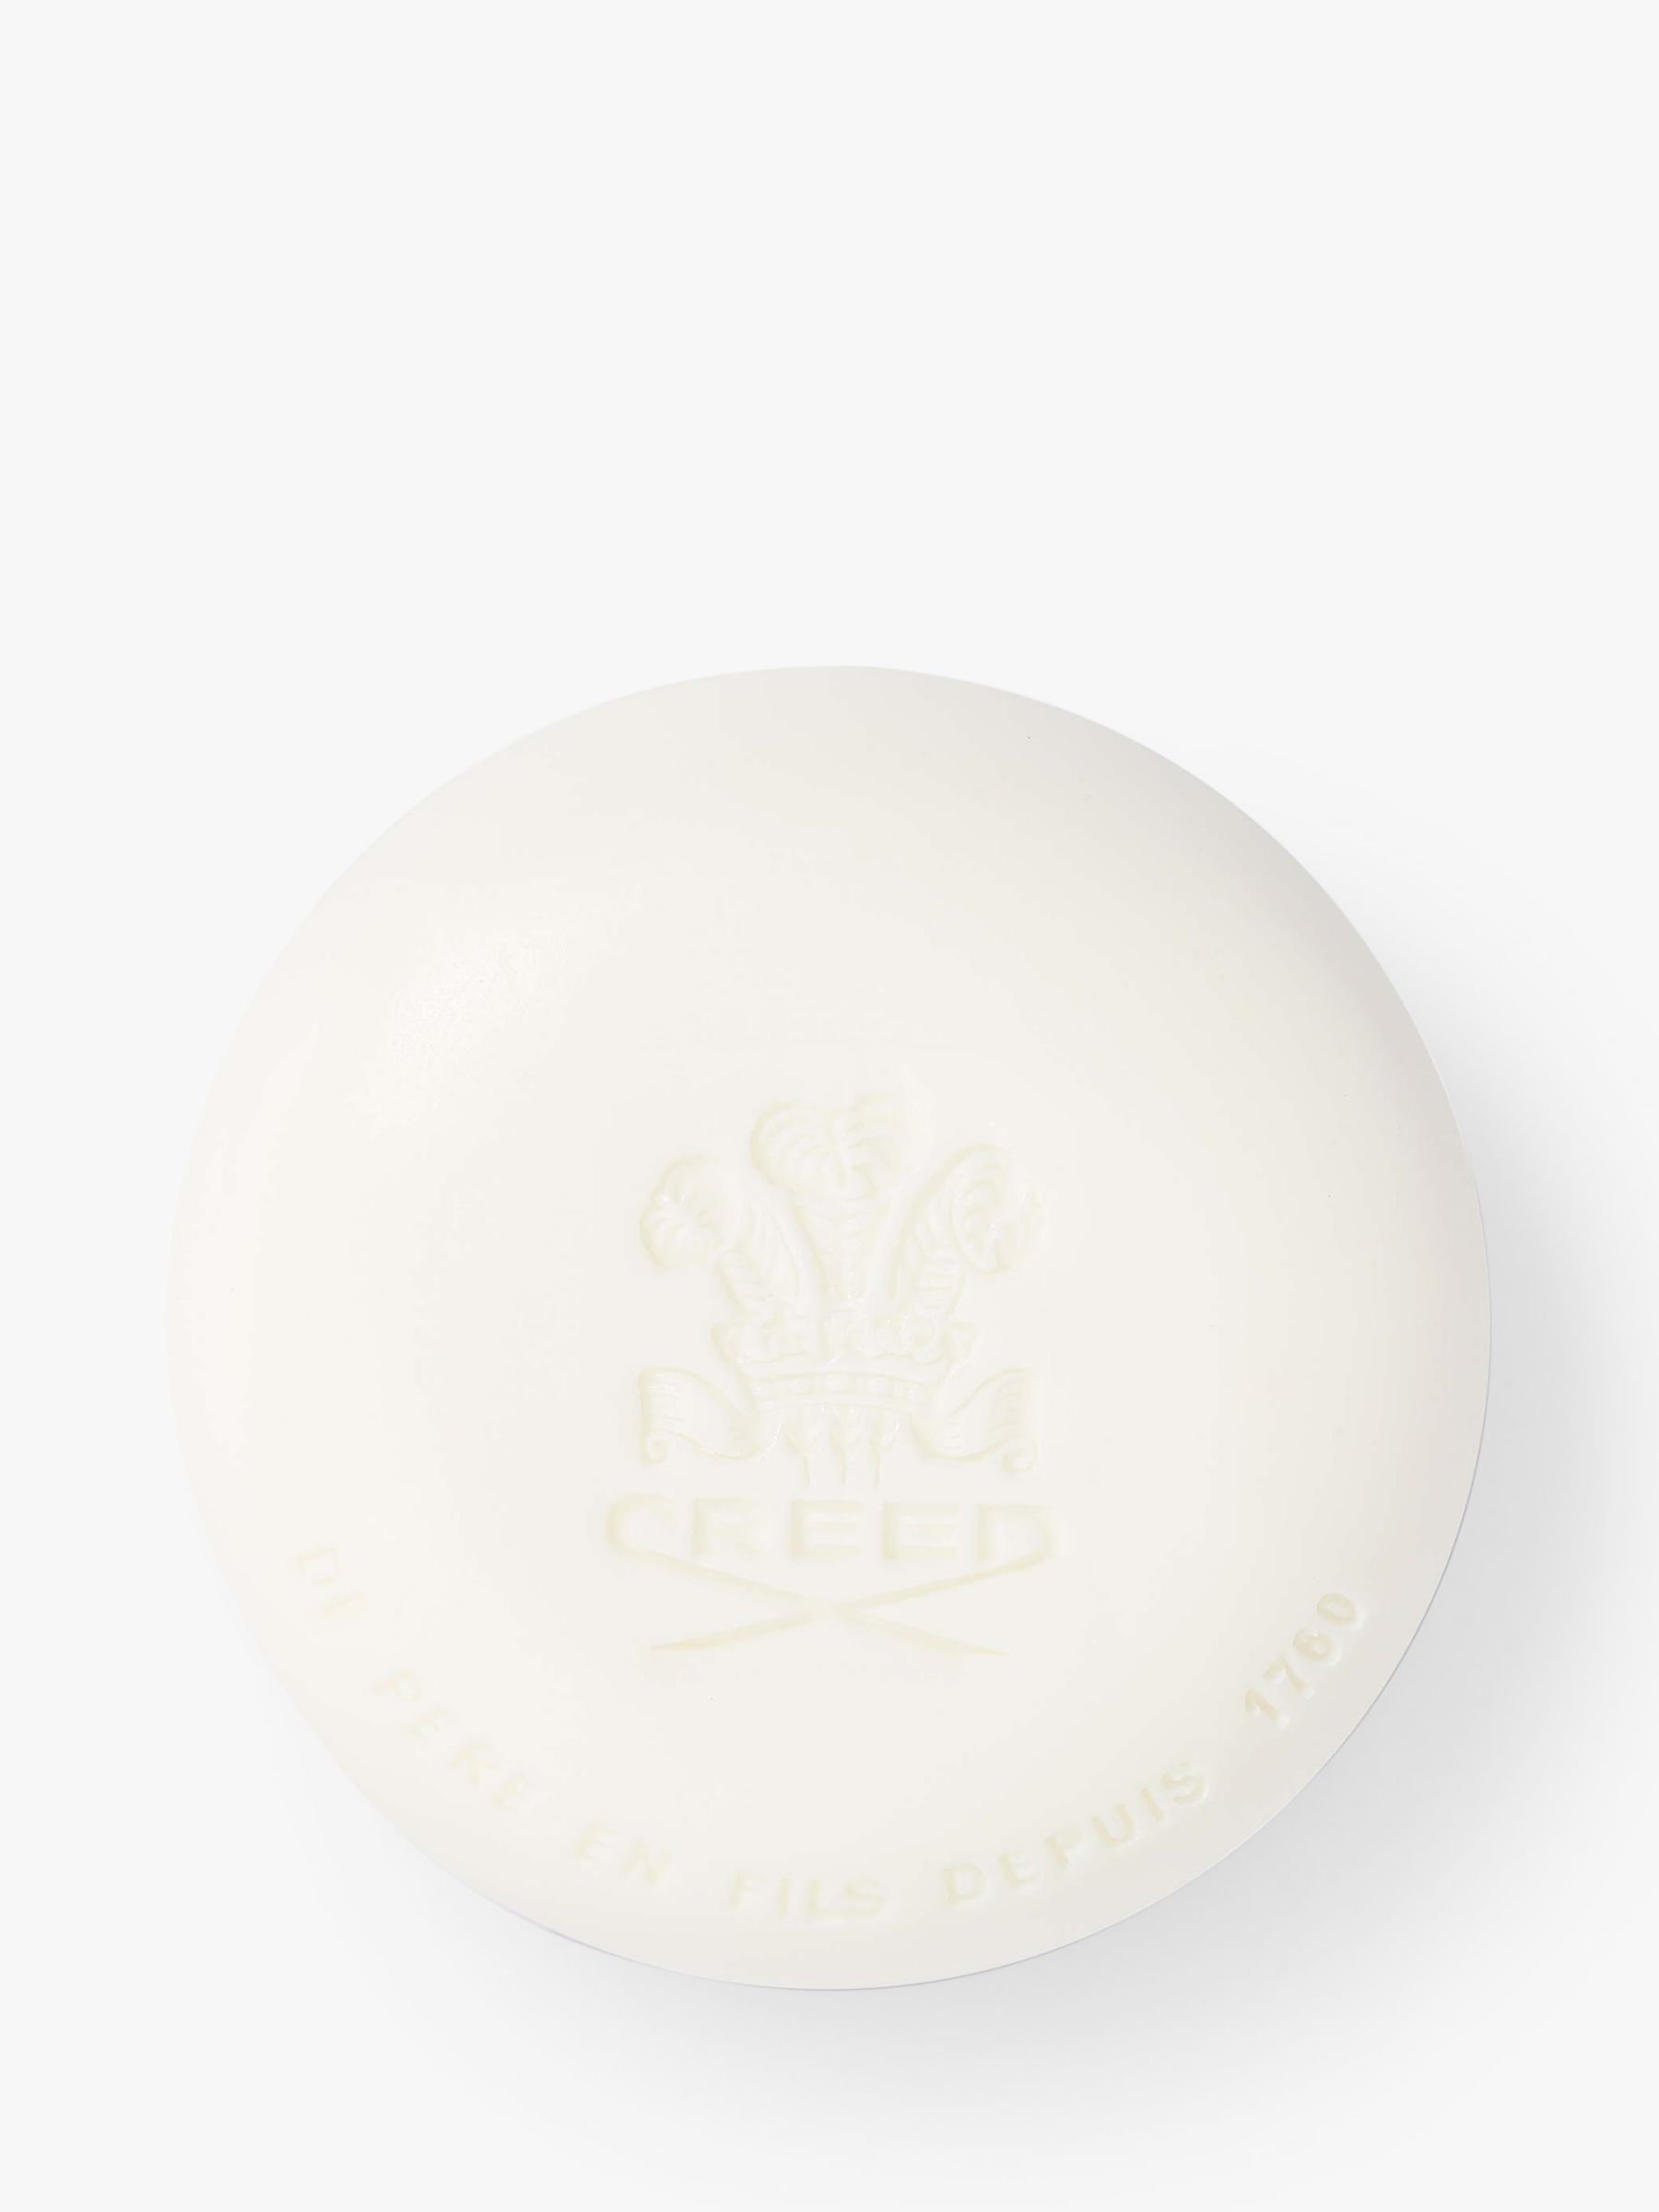 CREED Silver Mountain Water Soap, 150g at John Lewis & Partners